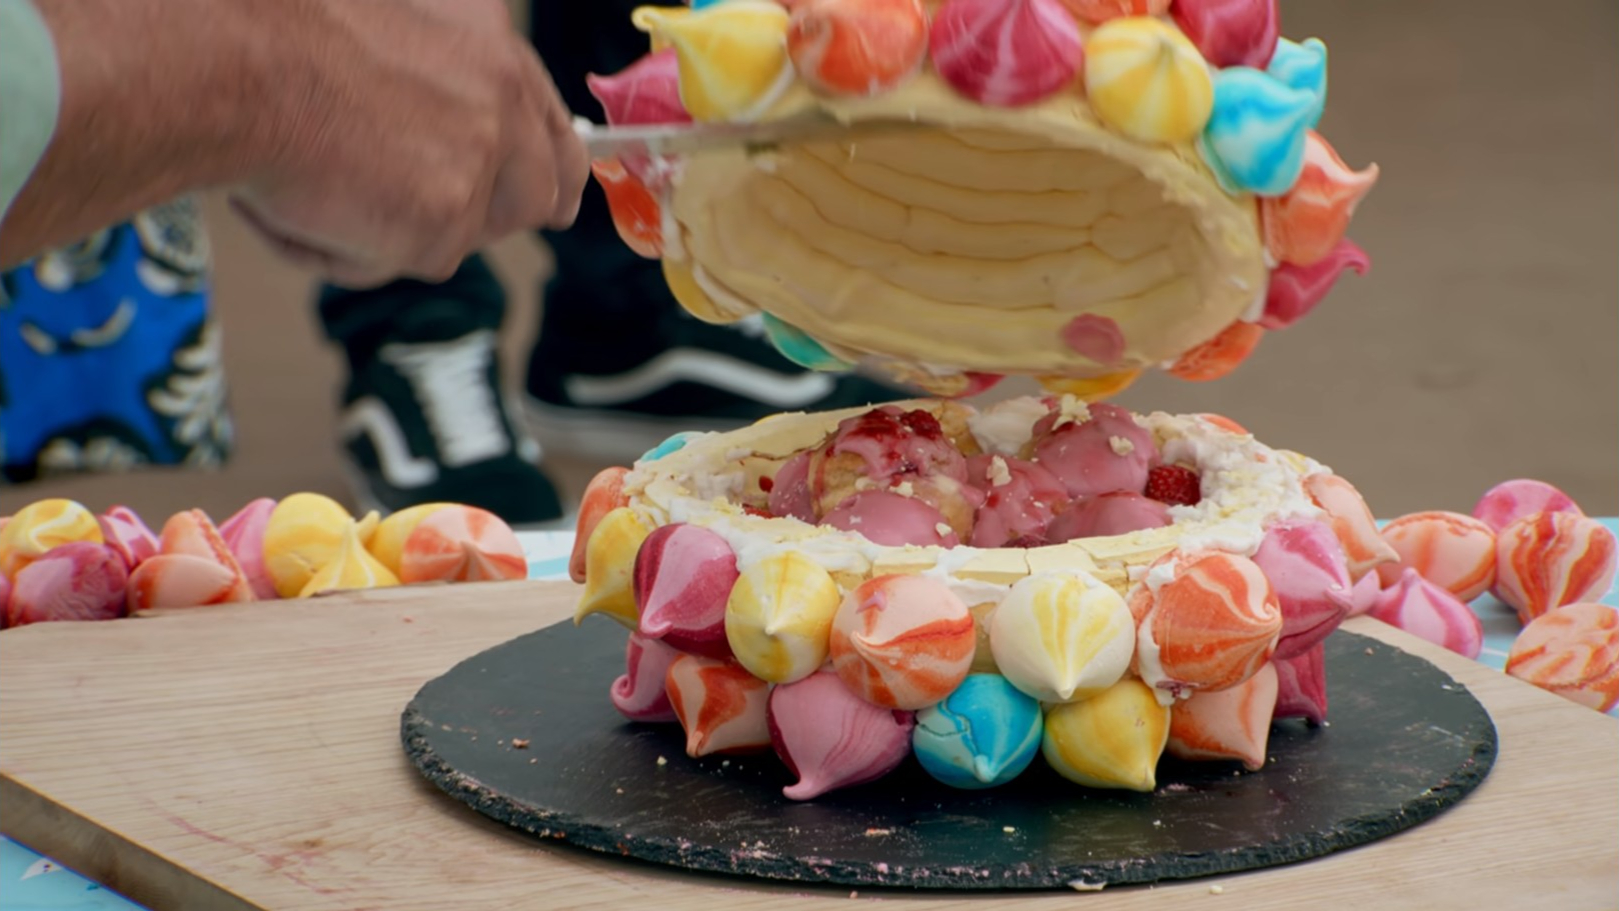 Cristy's Croquembouche Meringue Bombe Showstopper from 'The Great British Baking Show' Season 14's Desserts Week 